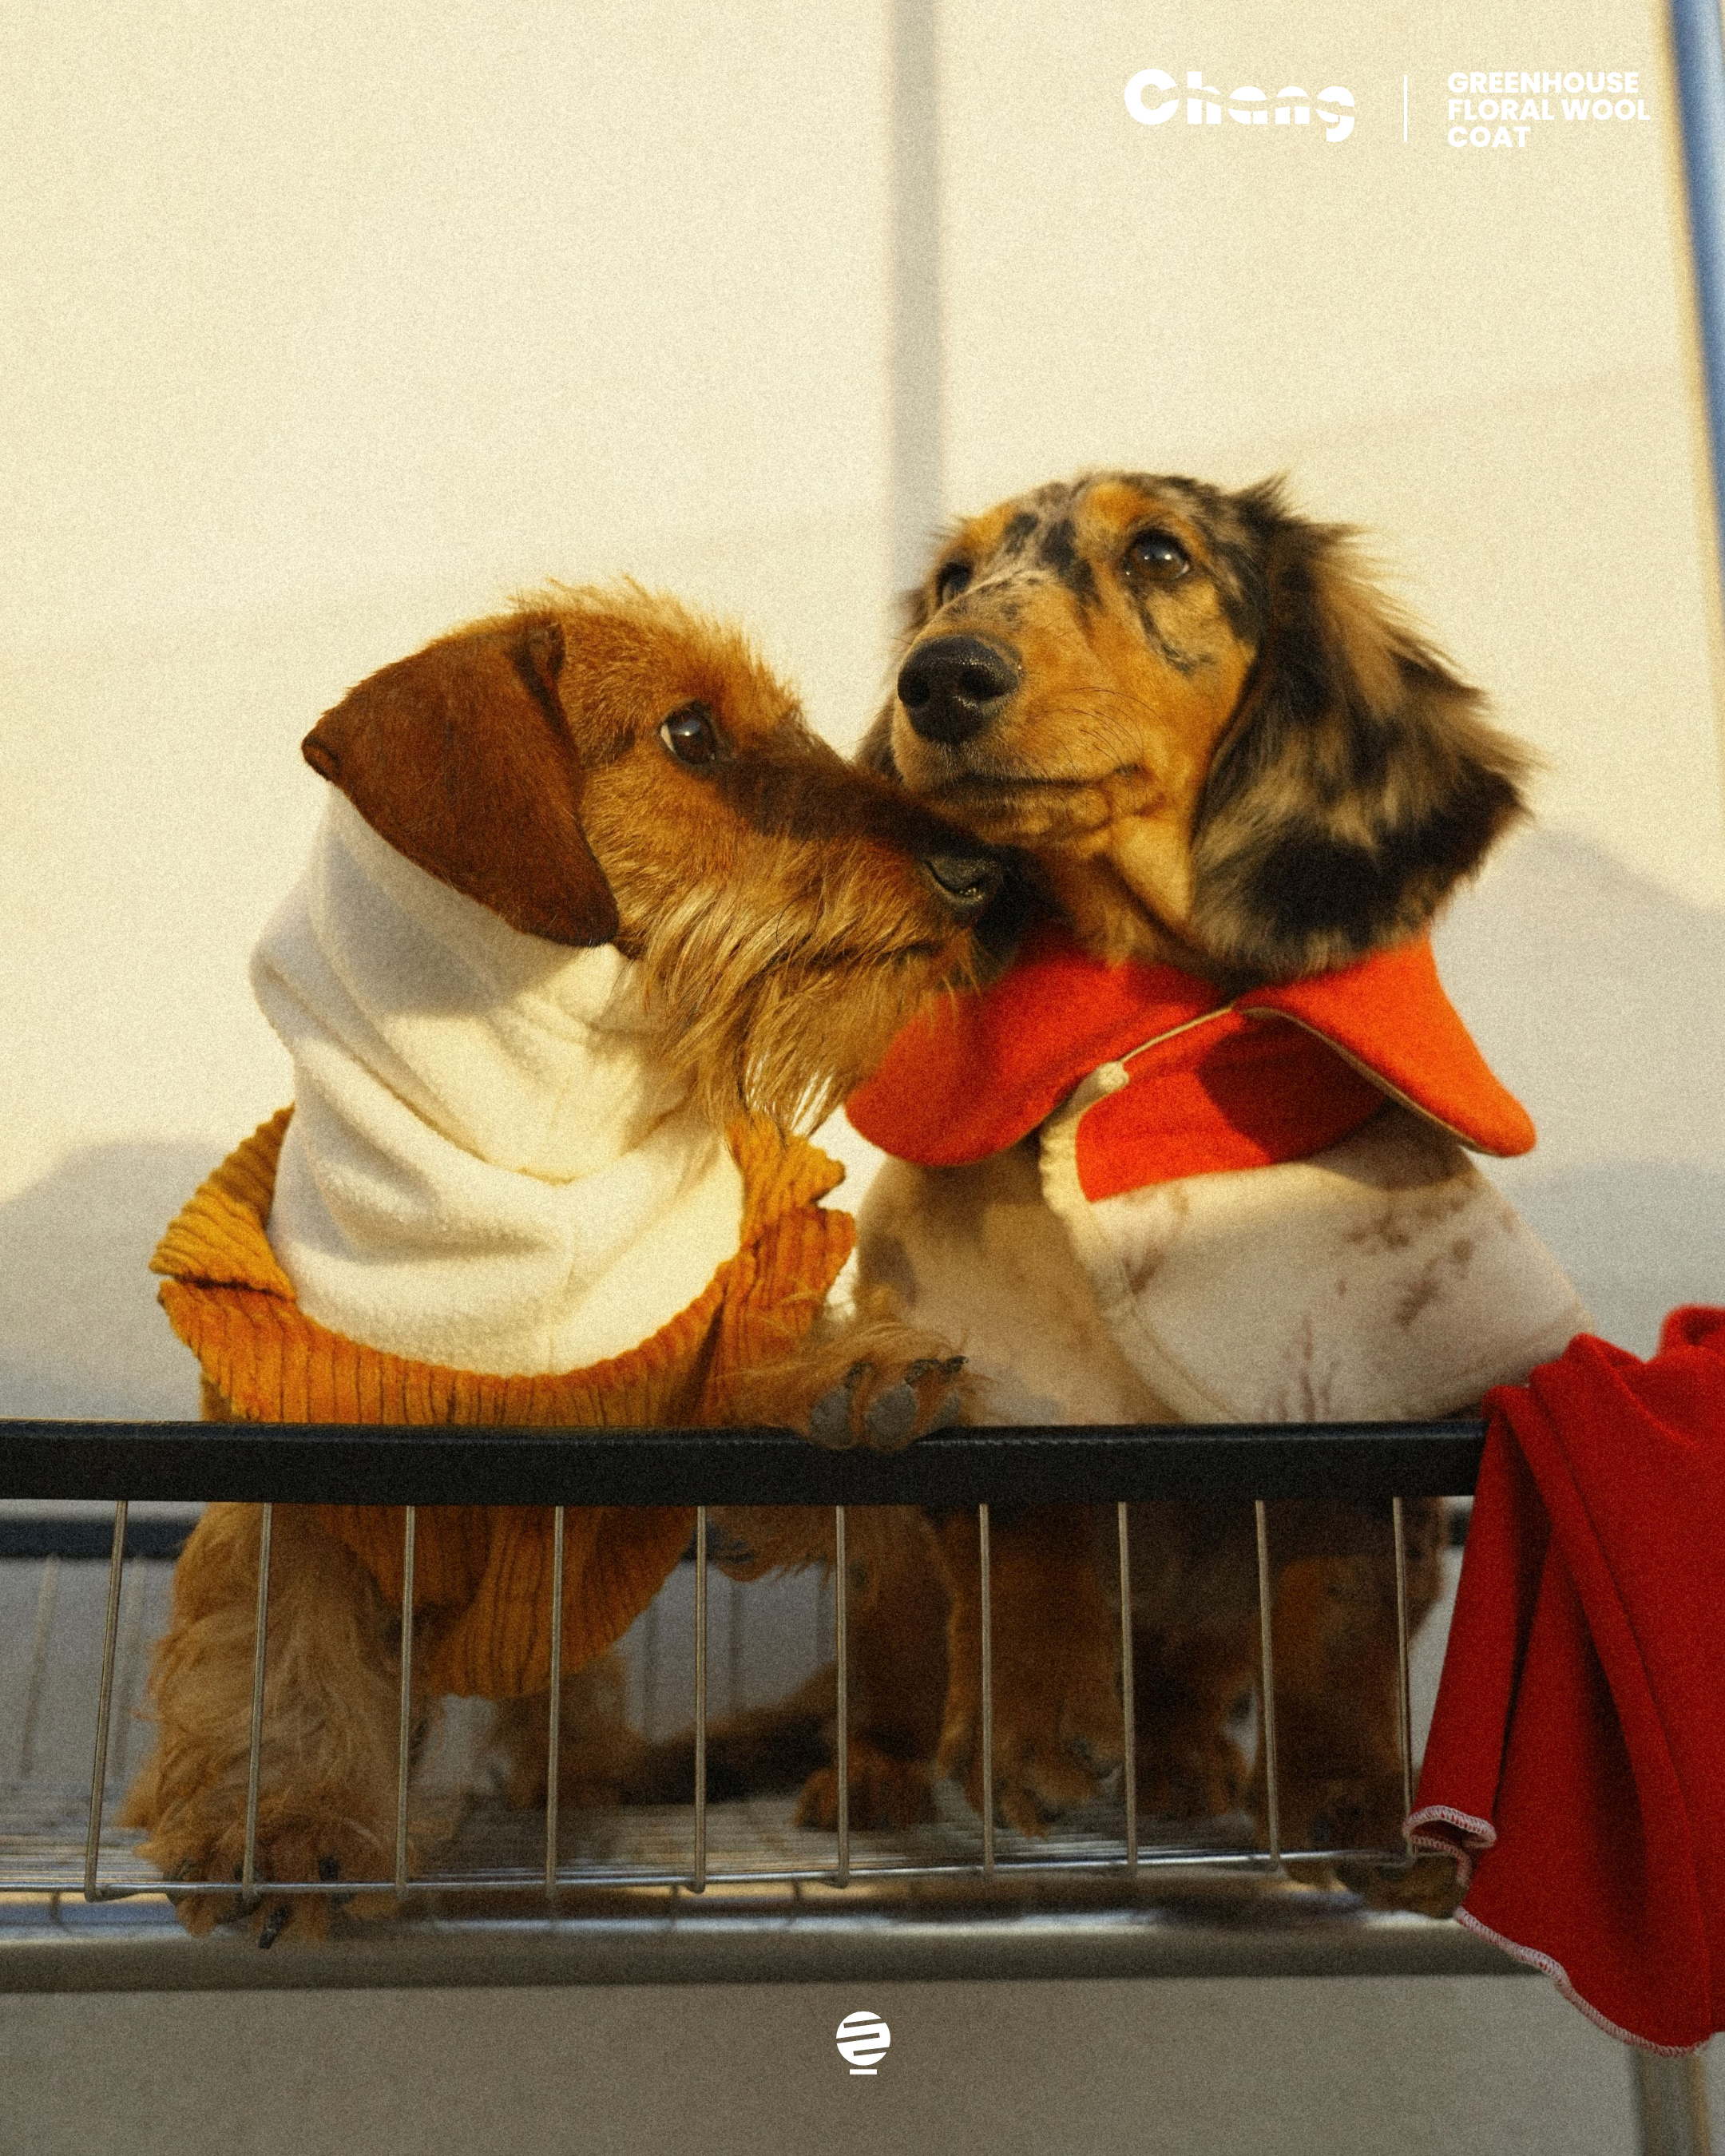 Australian Winter Chill: What Clothes Does Your Dachshund Puppy Need?